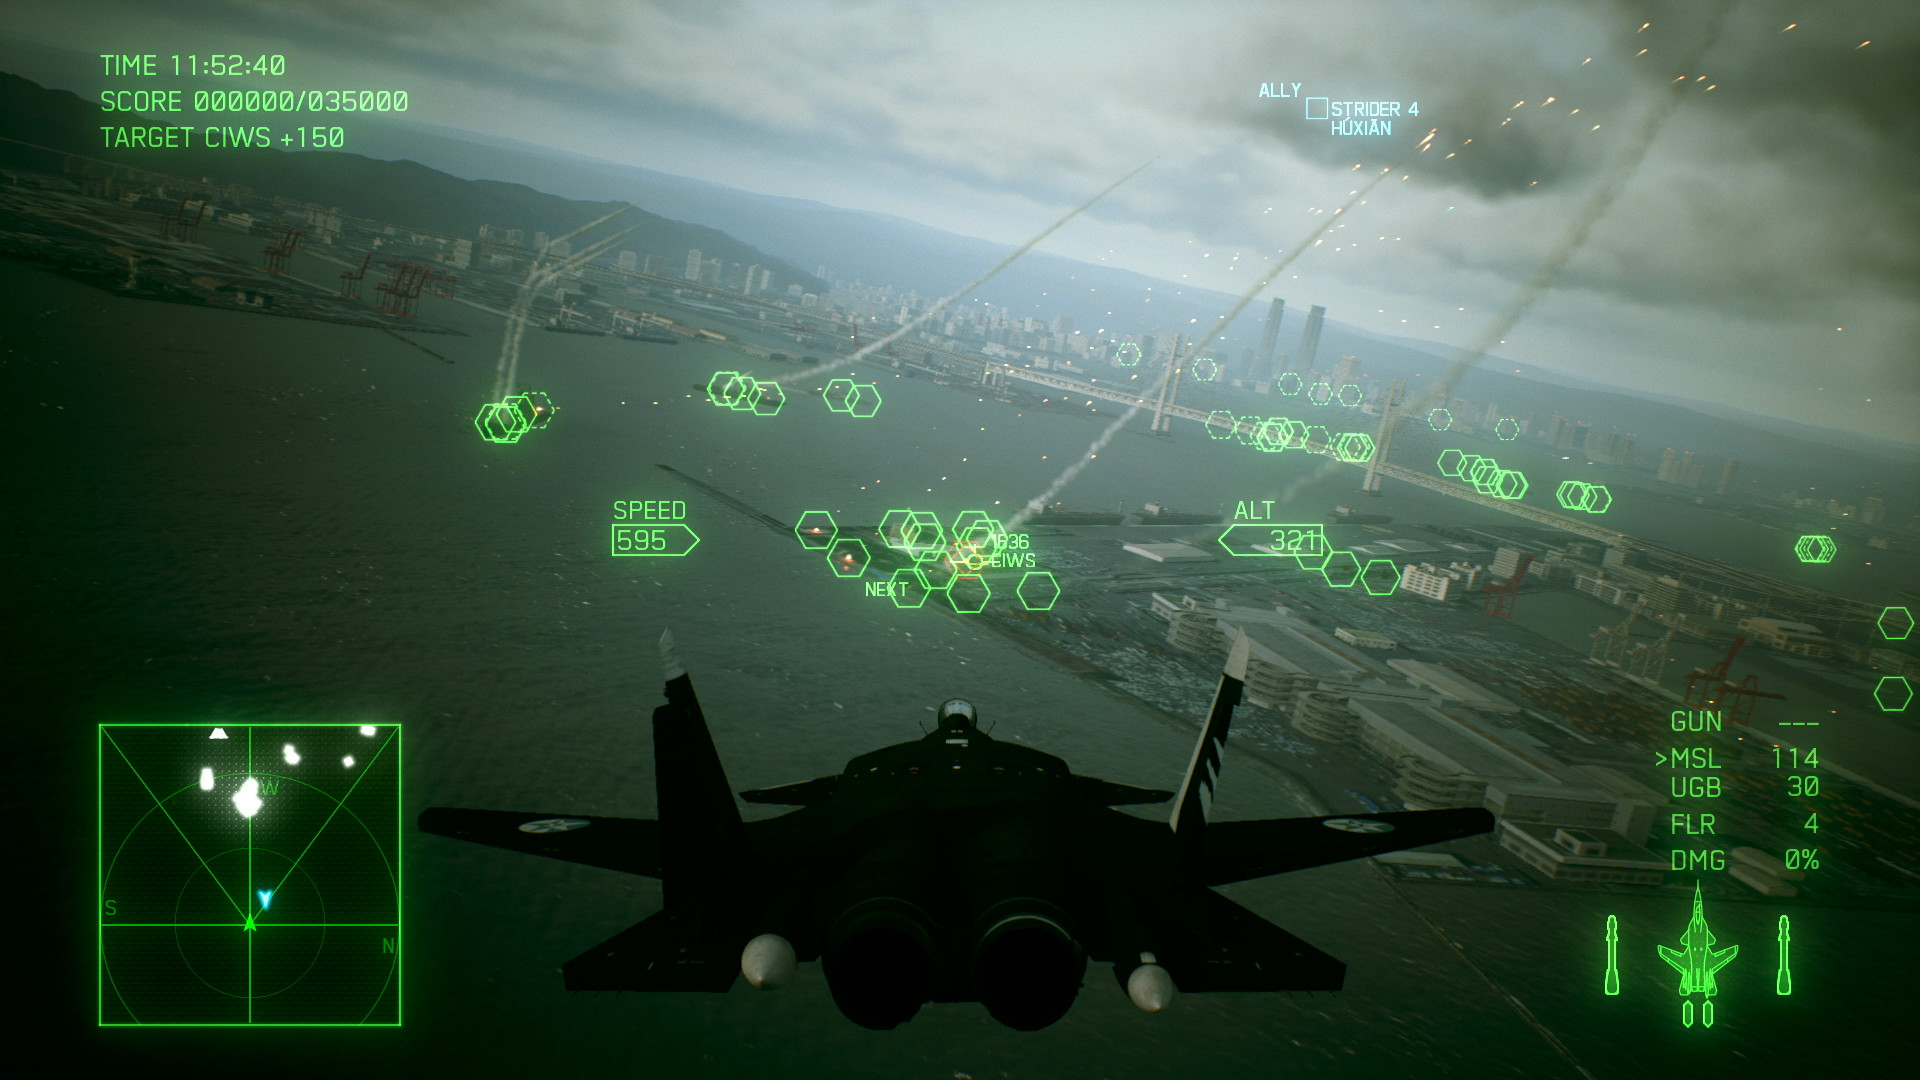 ACE COMBAT 7: Skies Unknown's newest DLC Mission #5 'Anchorhead